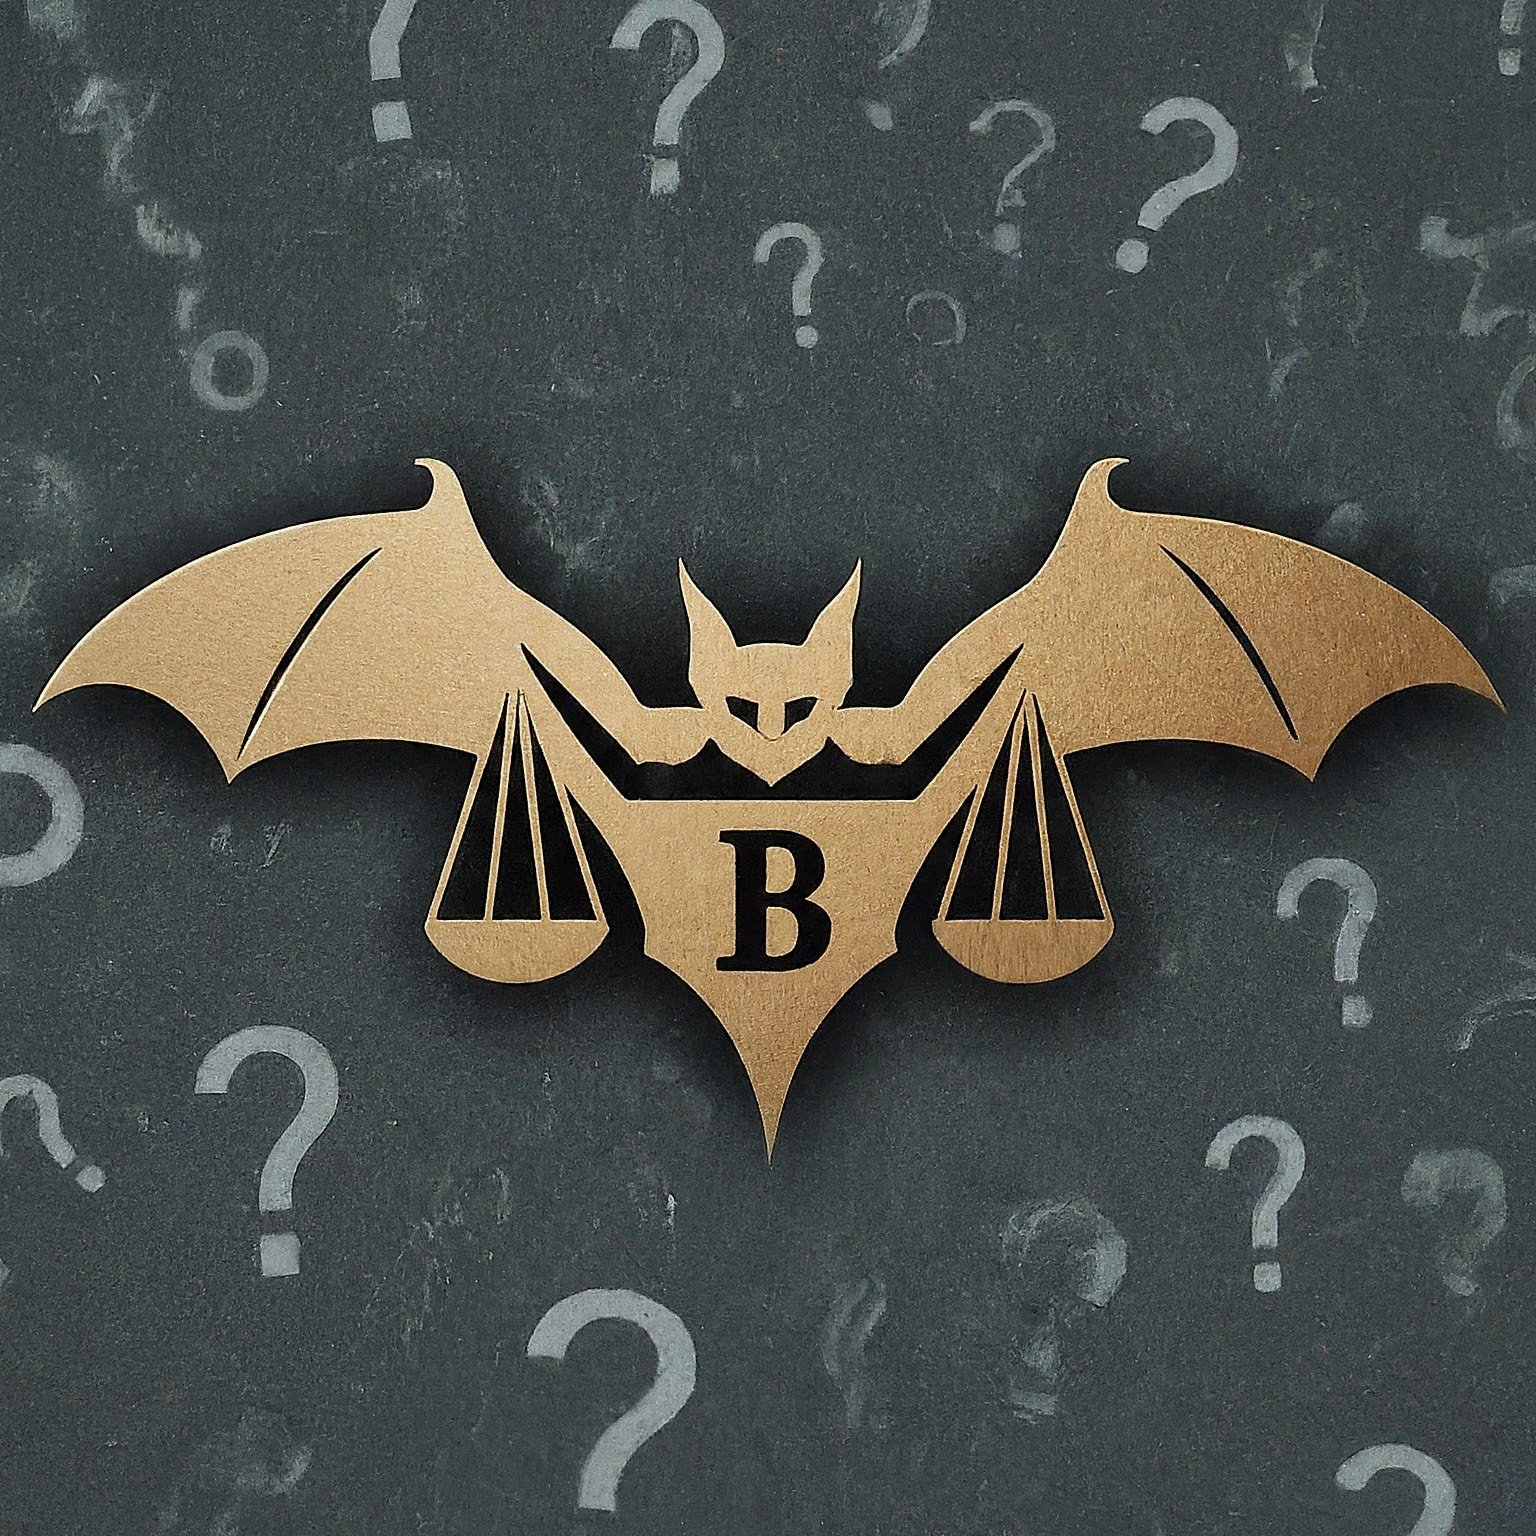 B Logo with Scales of Justice in front of Question Marks